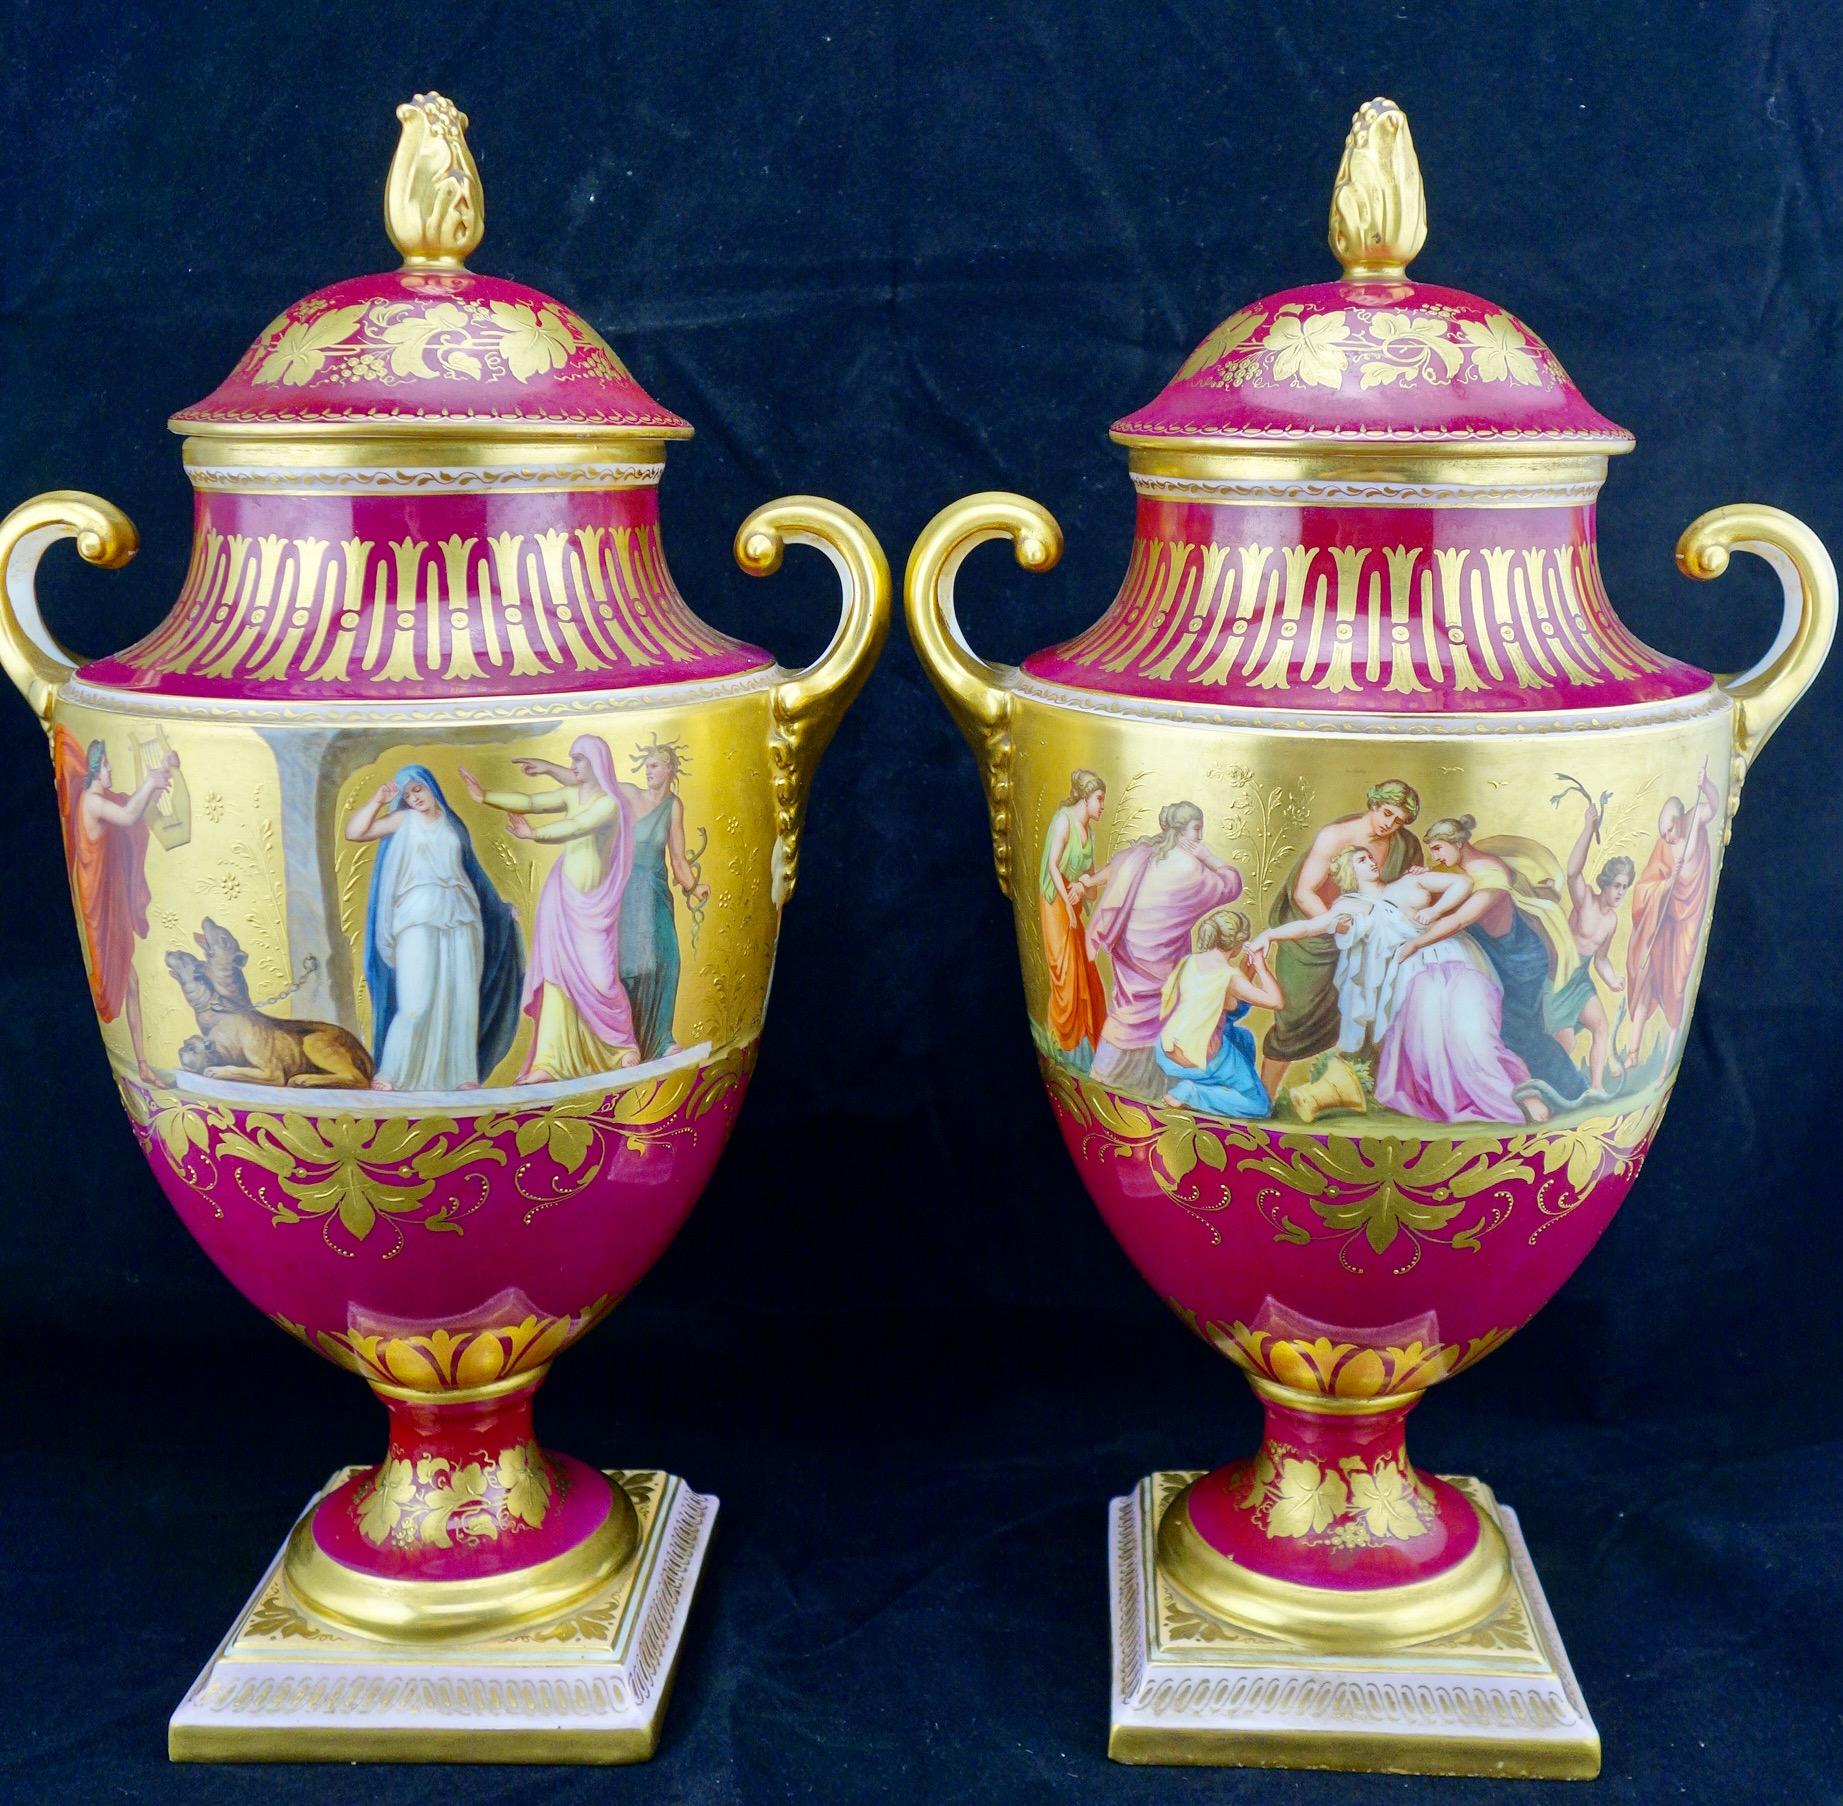 Royal Vienna pair of finely hand painted and background gilded covered vases. The vases are in neoclassical style, depicting the scenes from the legends of Orpheus and Eurydice. Each scene is annotated in German on the bottom of the corresponding